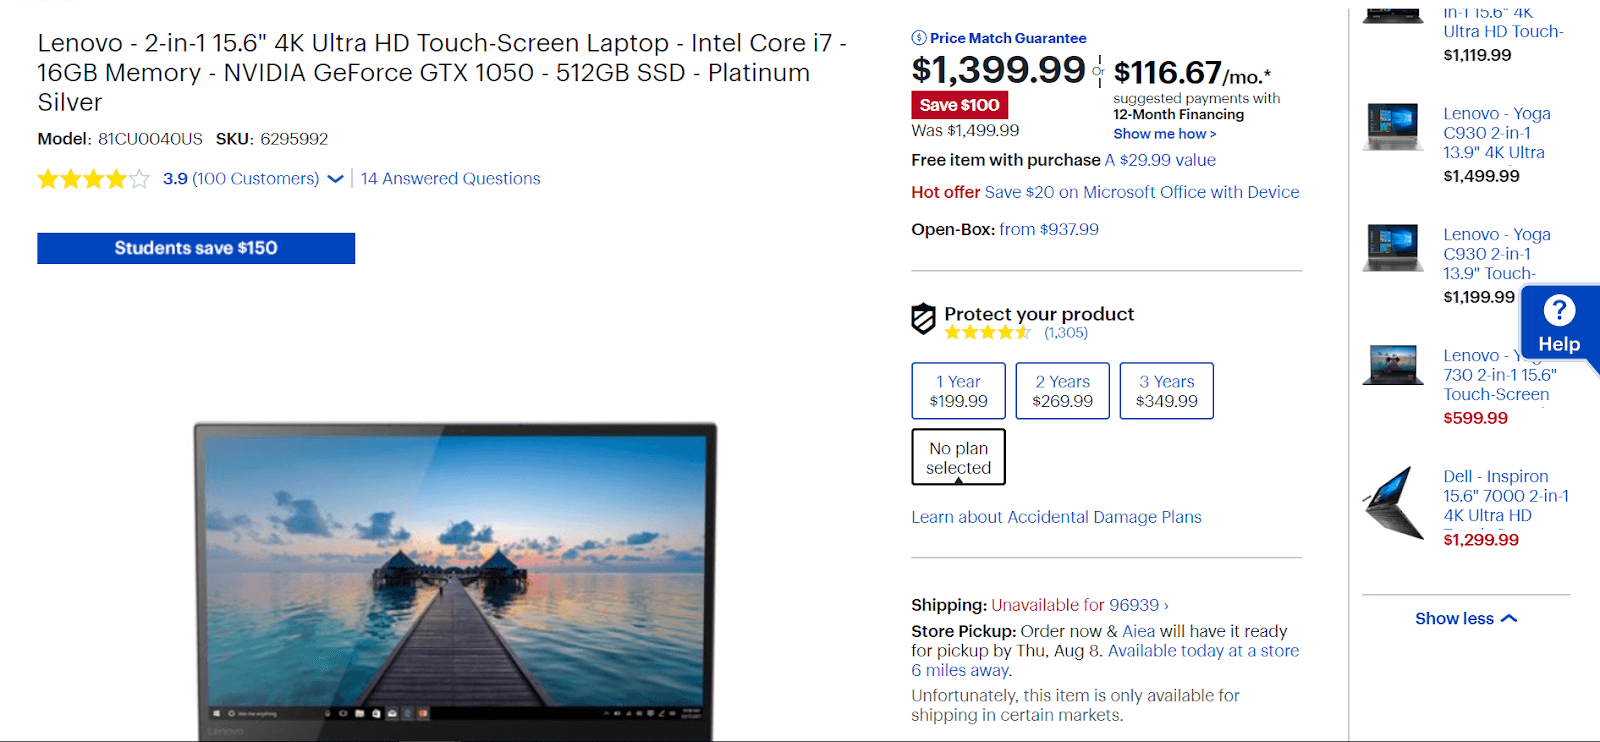 bestbuy ecommerce product page